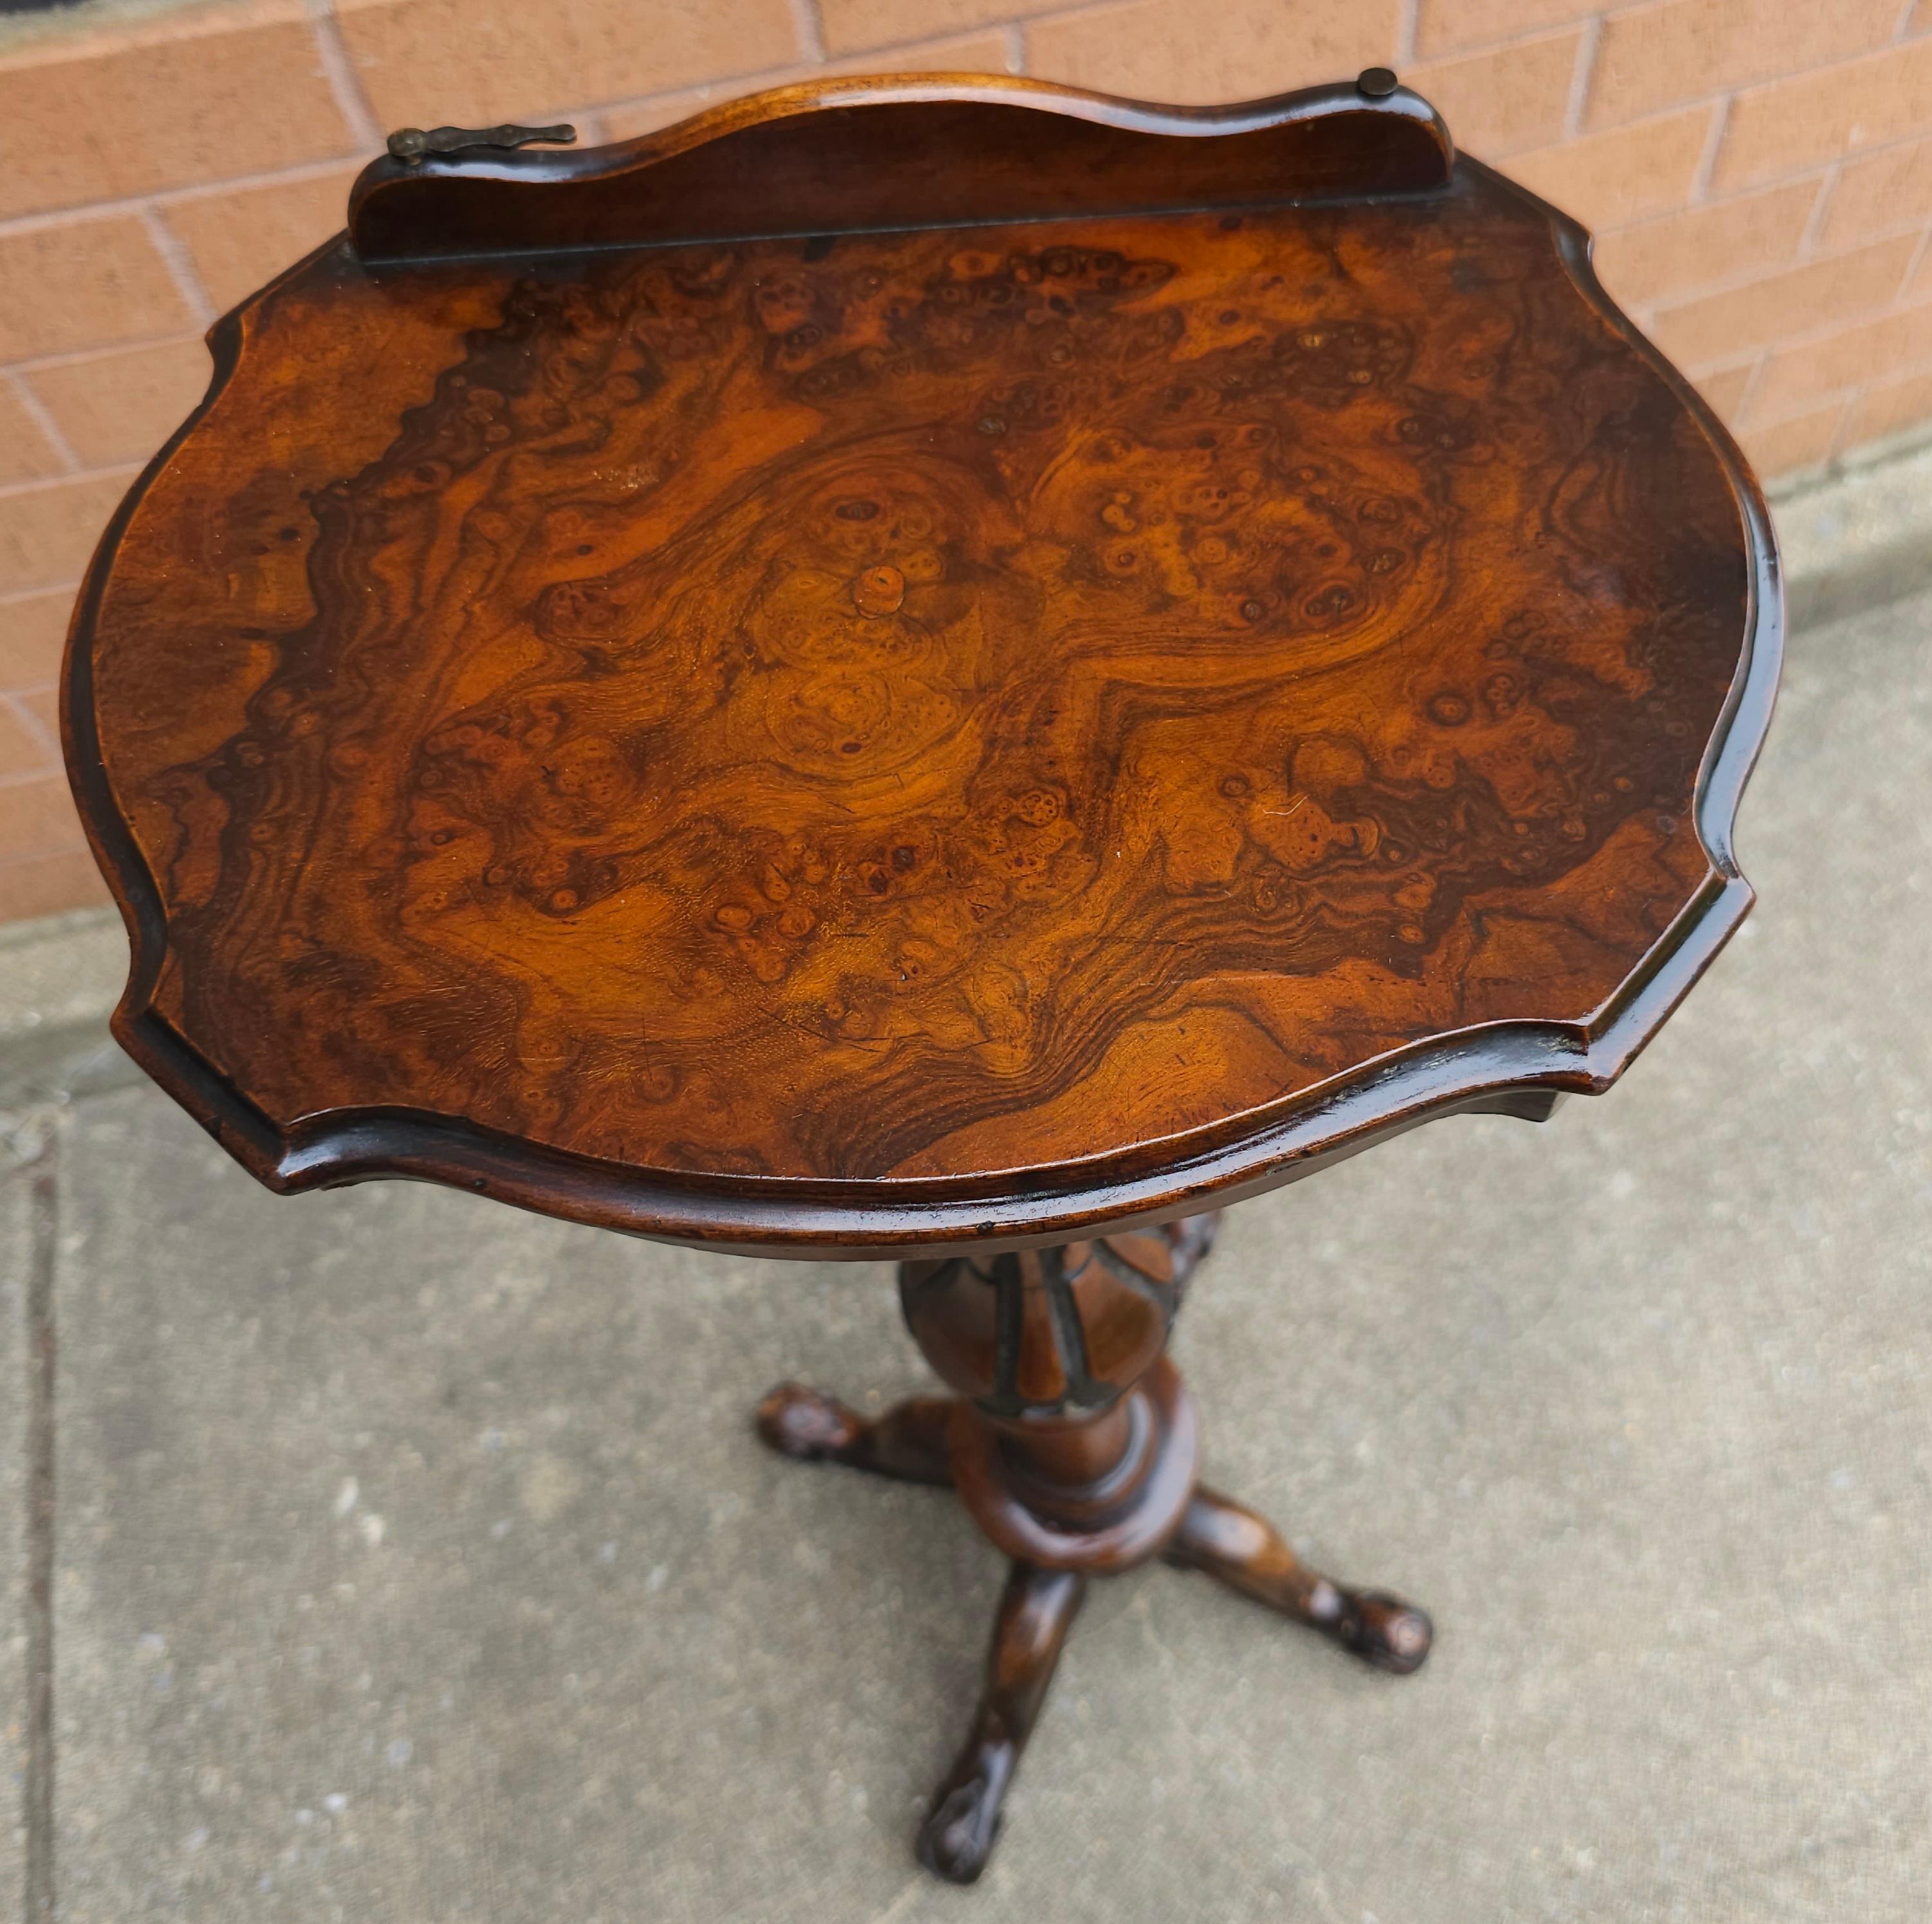 Rosewood 19th Century Victorian Rococo Revival Walnut Quadpod Music Stand For Sale